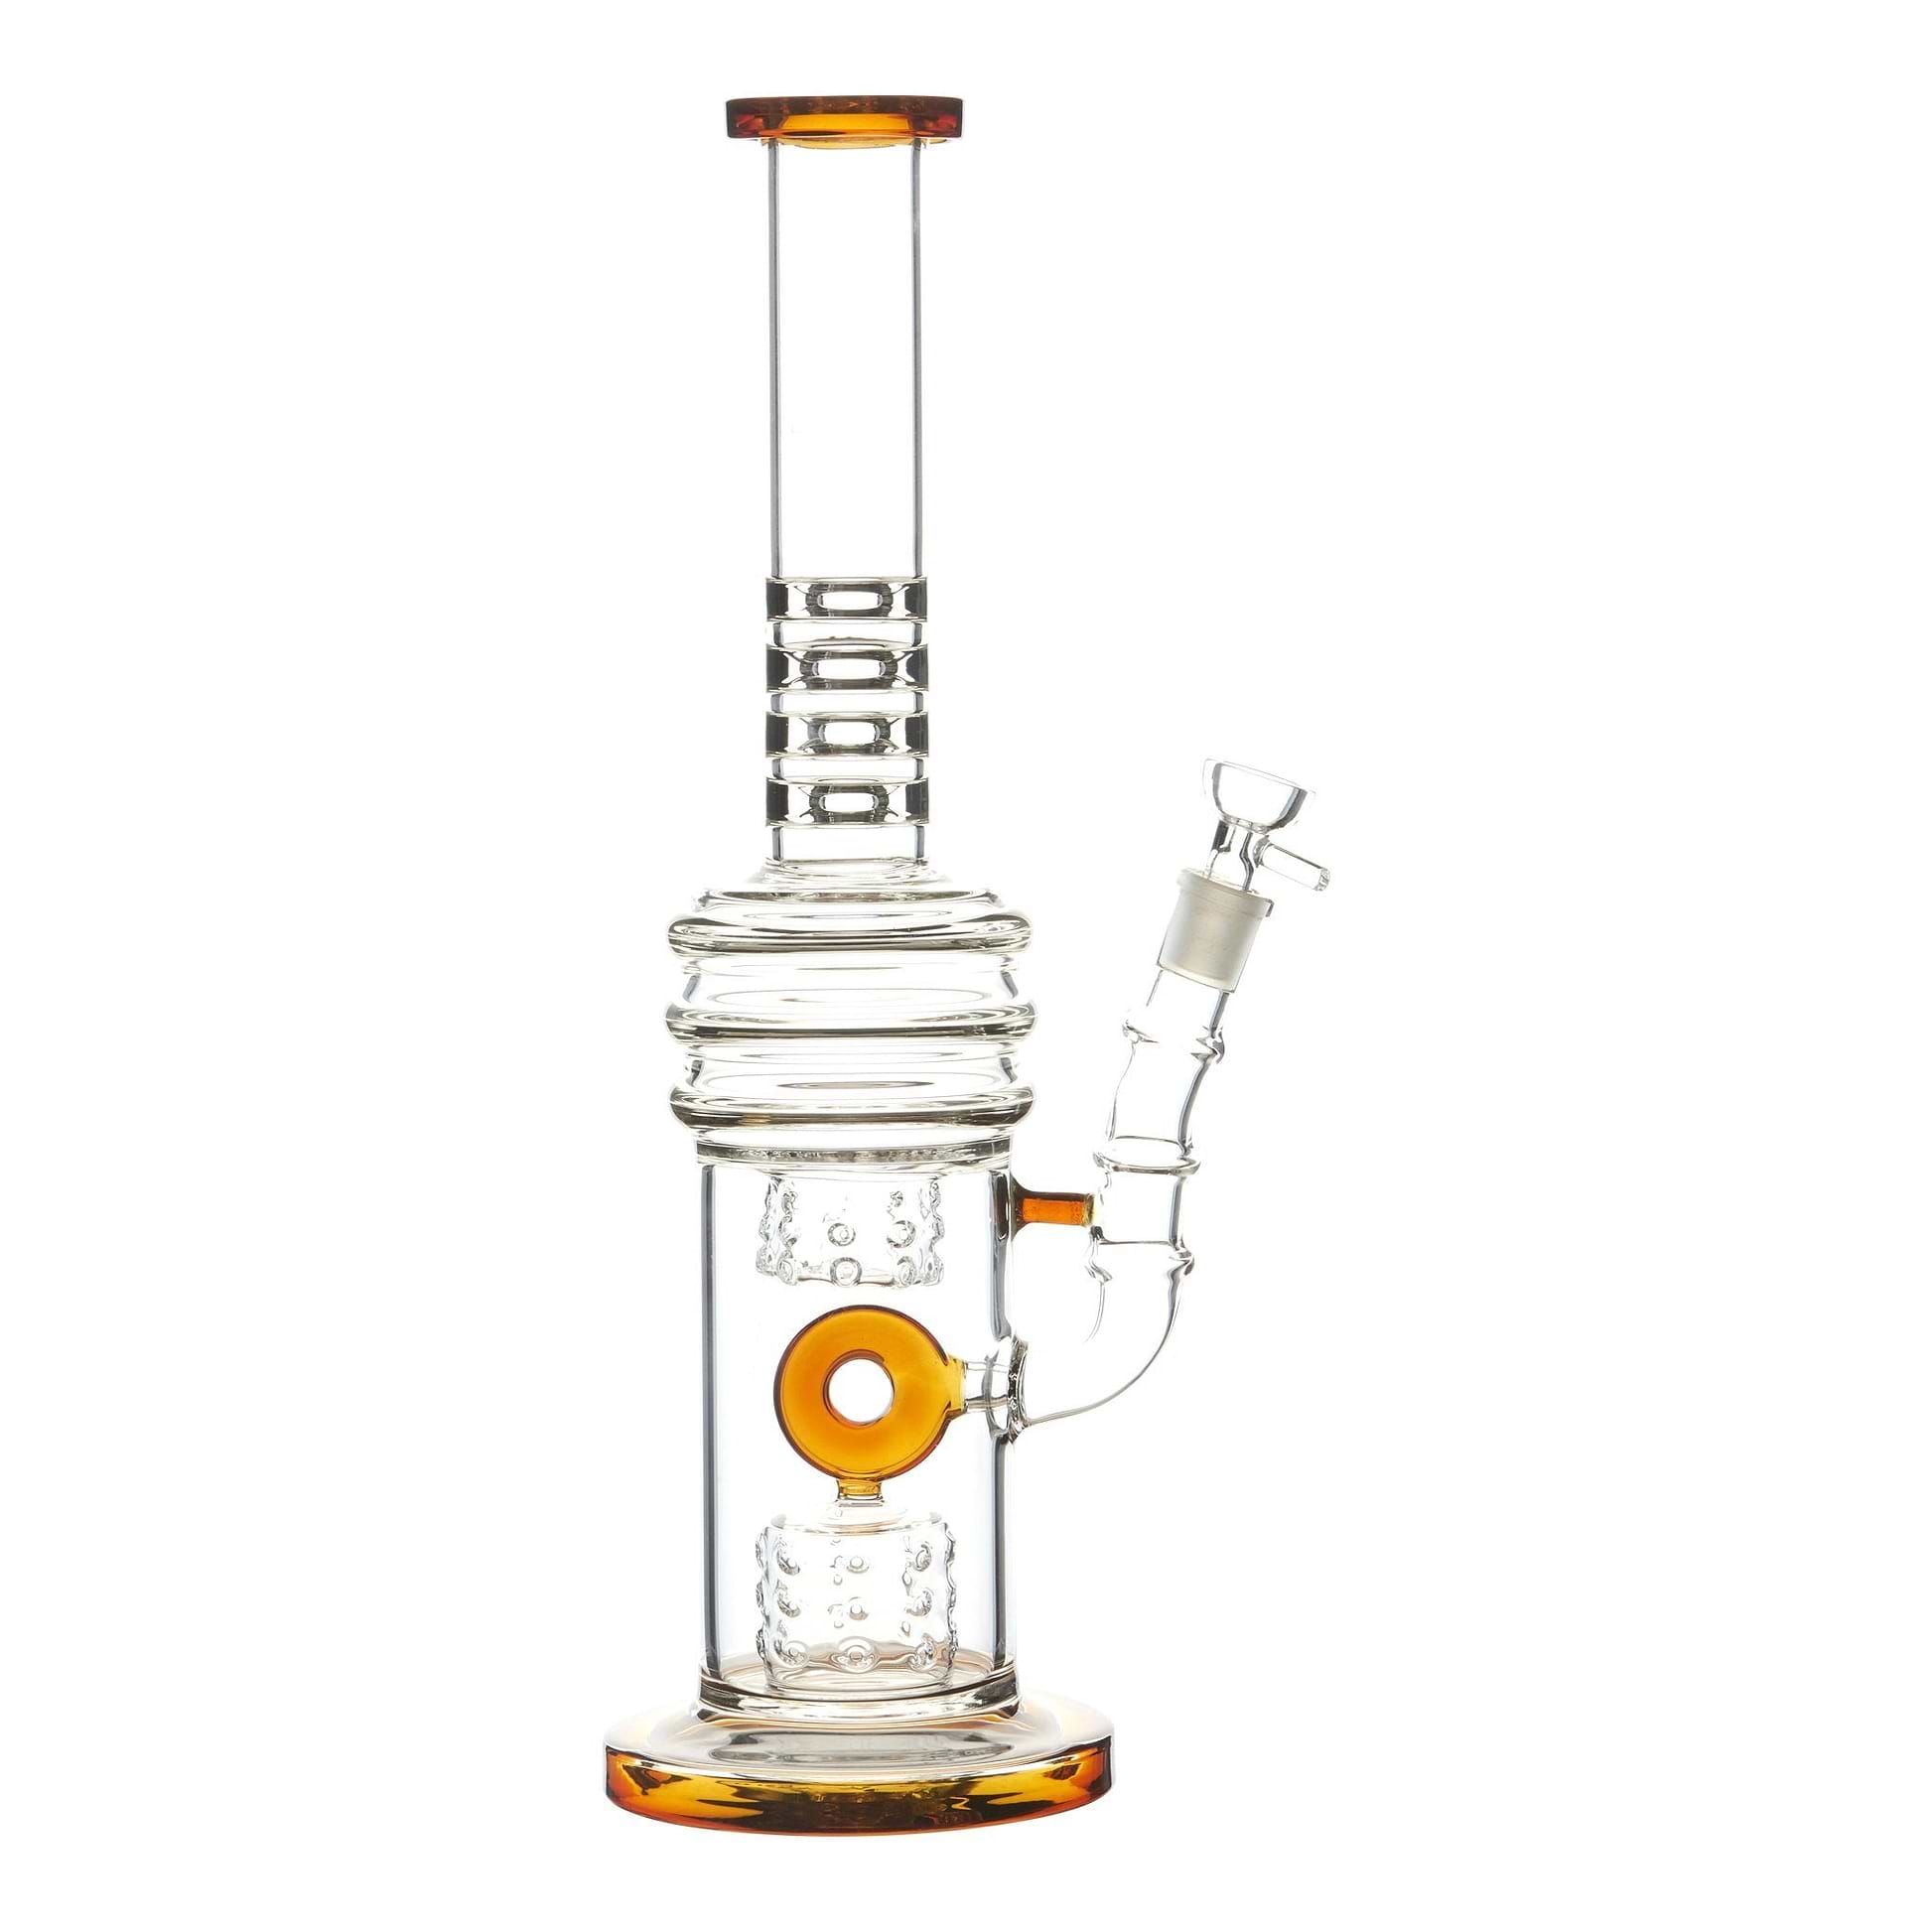 Amber 15-inch glass bong smoking device donut downstem colorful accents sleek and classic look sturdy base